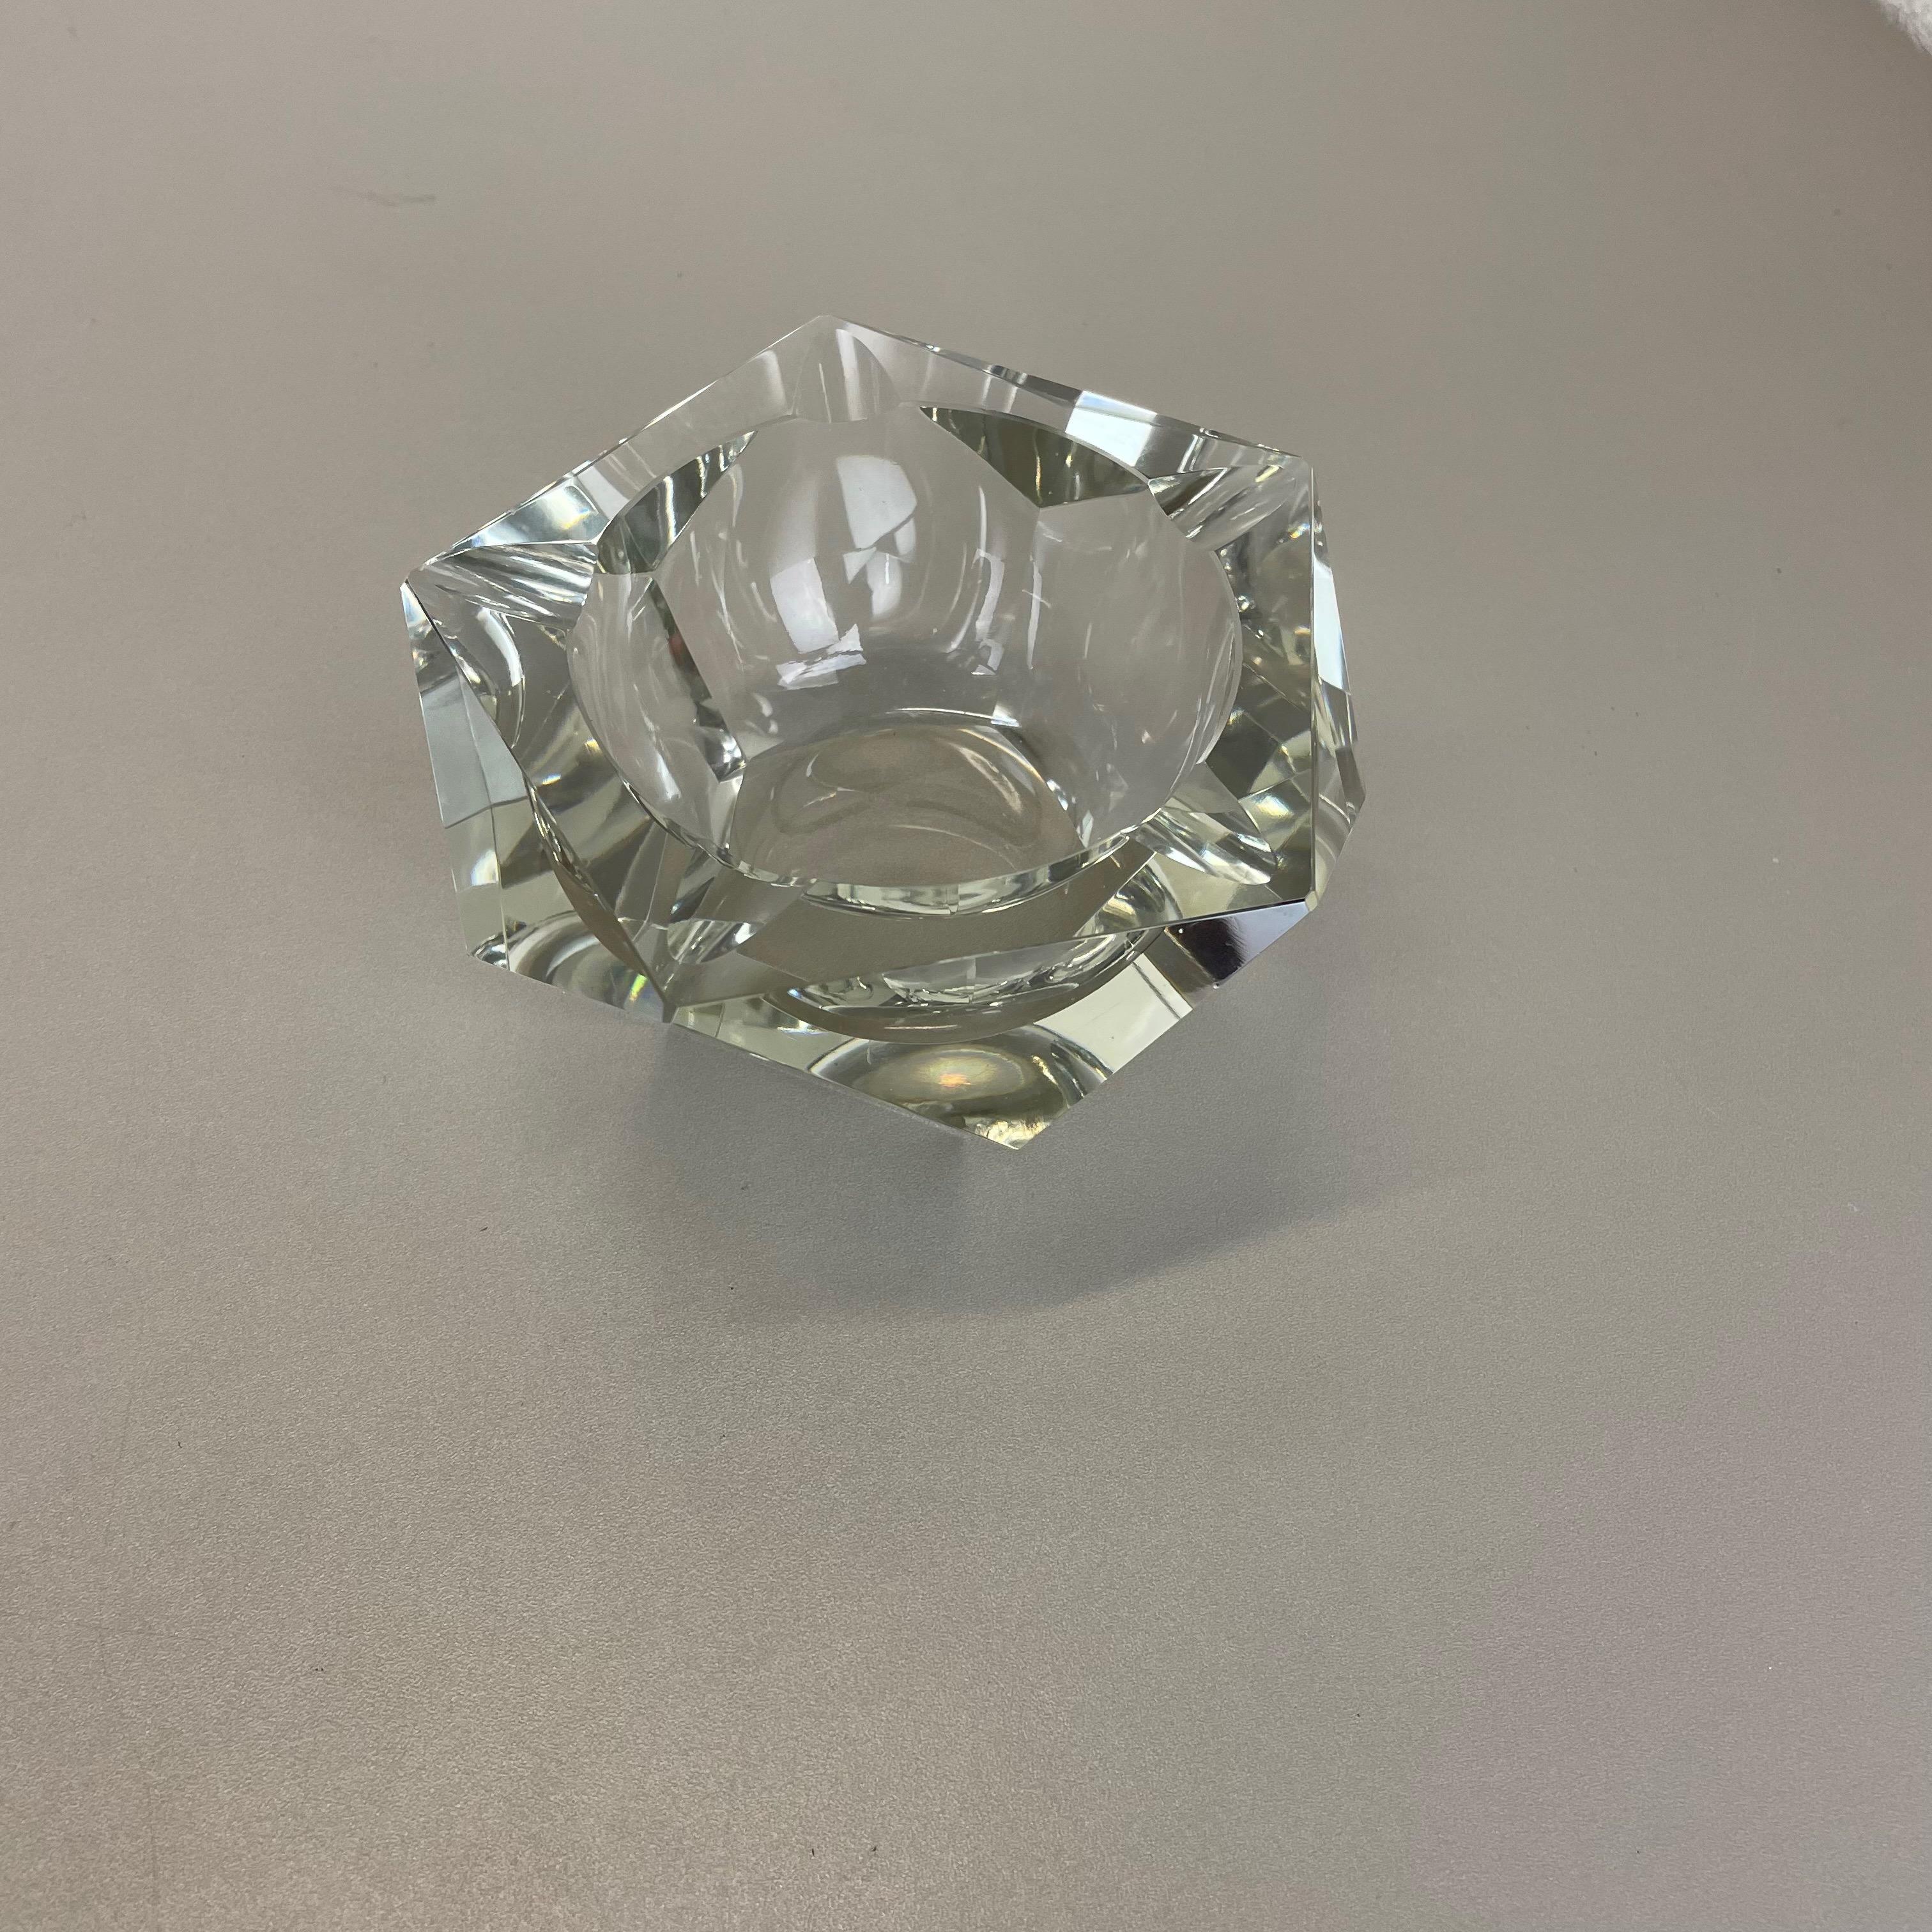 Italian Large Murano Faceted Diamond Lucid Bowl Ashtray Element, Italy, 1970s For Sale